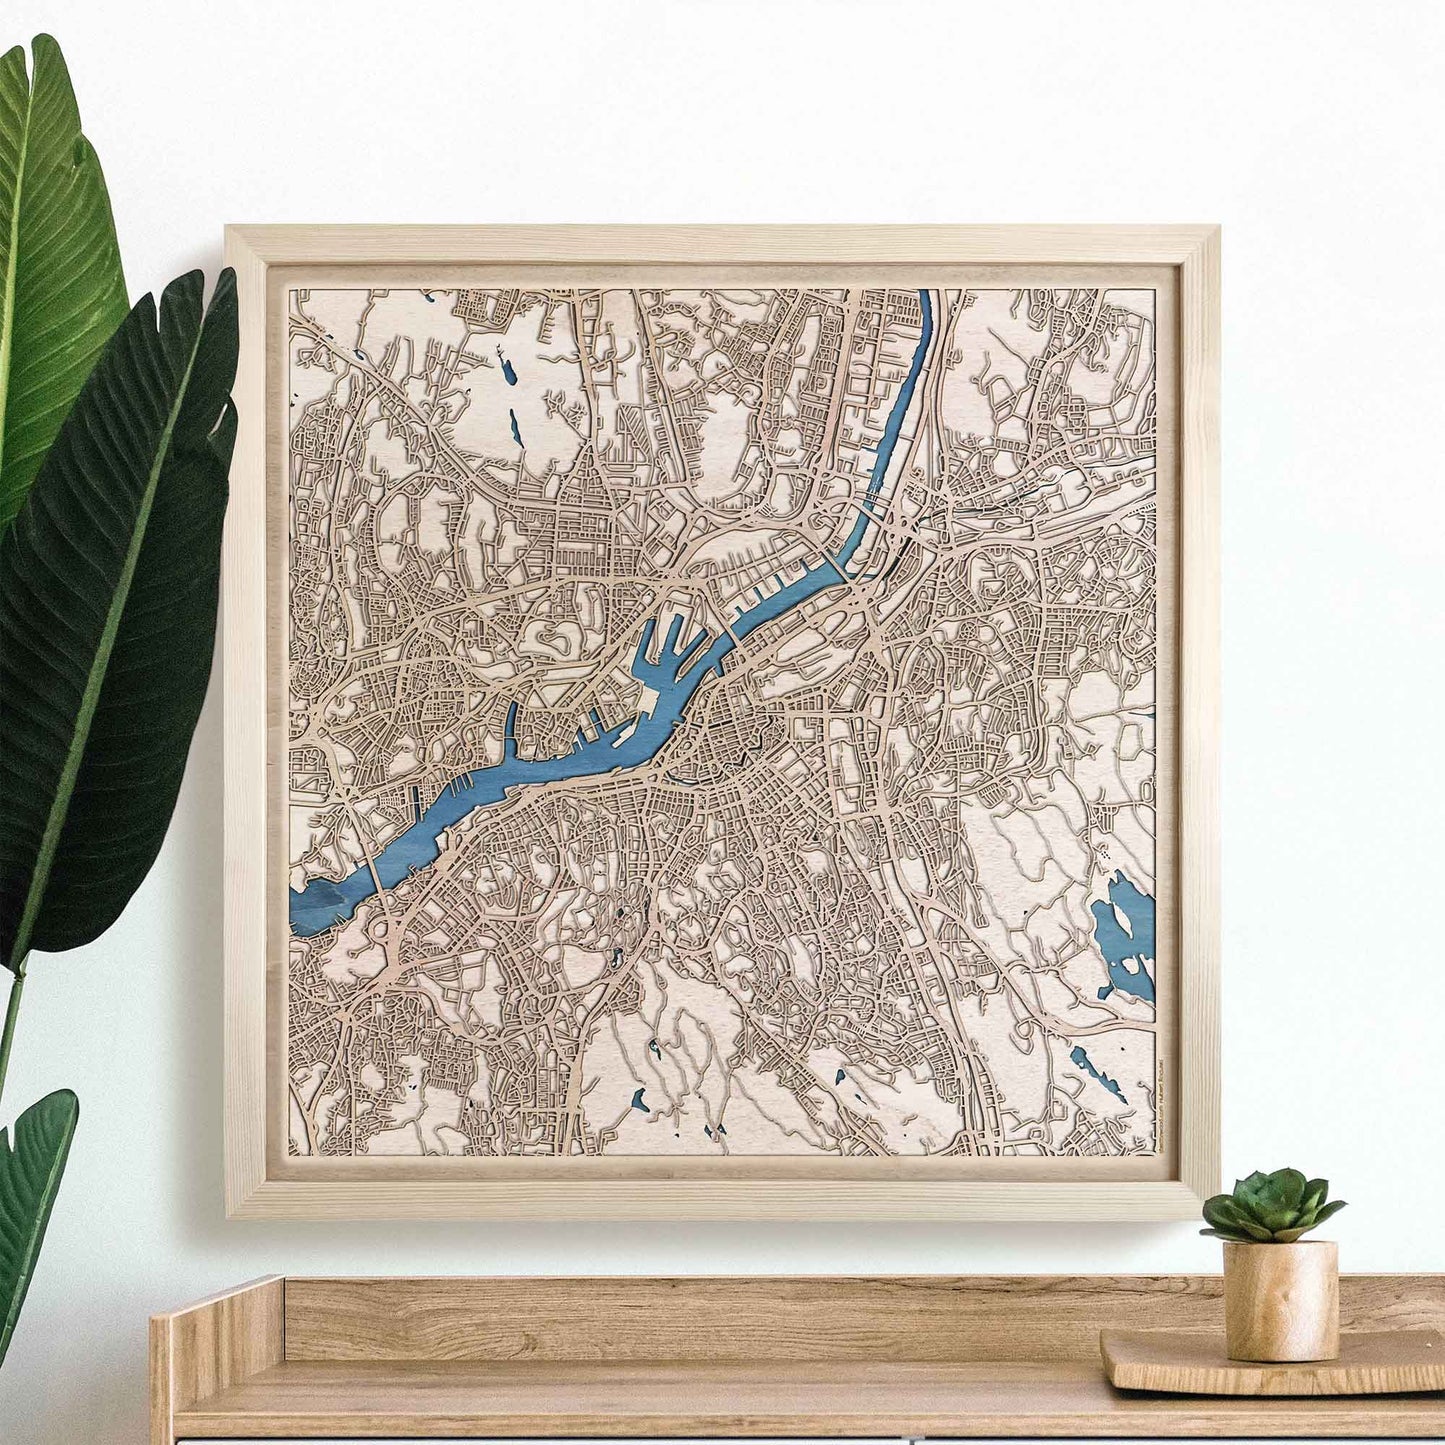 Gothenburg Wooden Map by CityWood - Custom Wood Map Art - Unique Laser Cut Engraved - Anniversary Gift